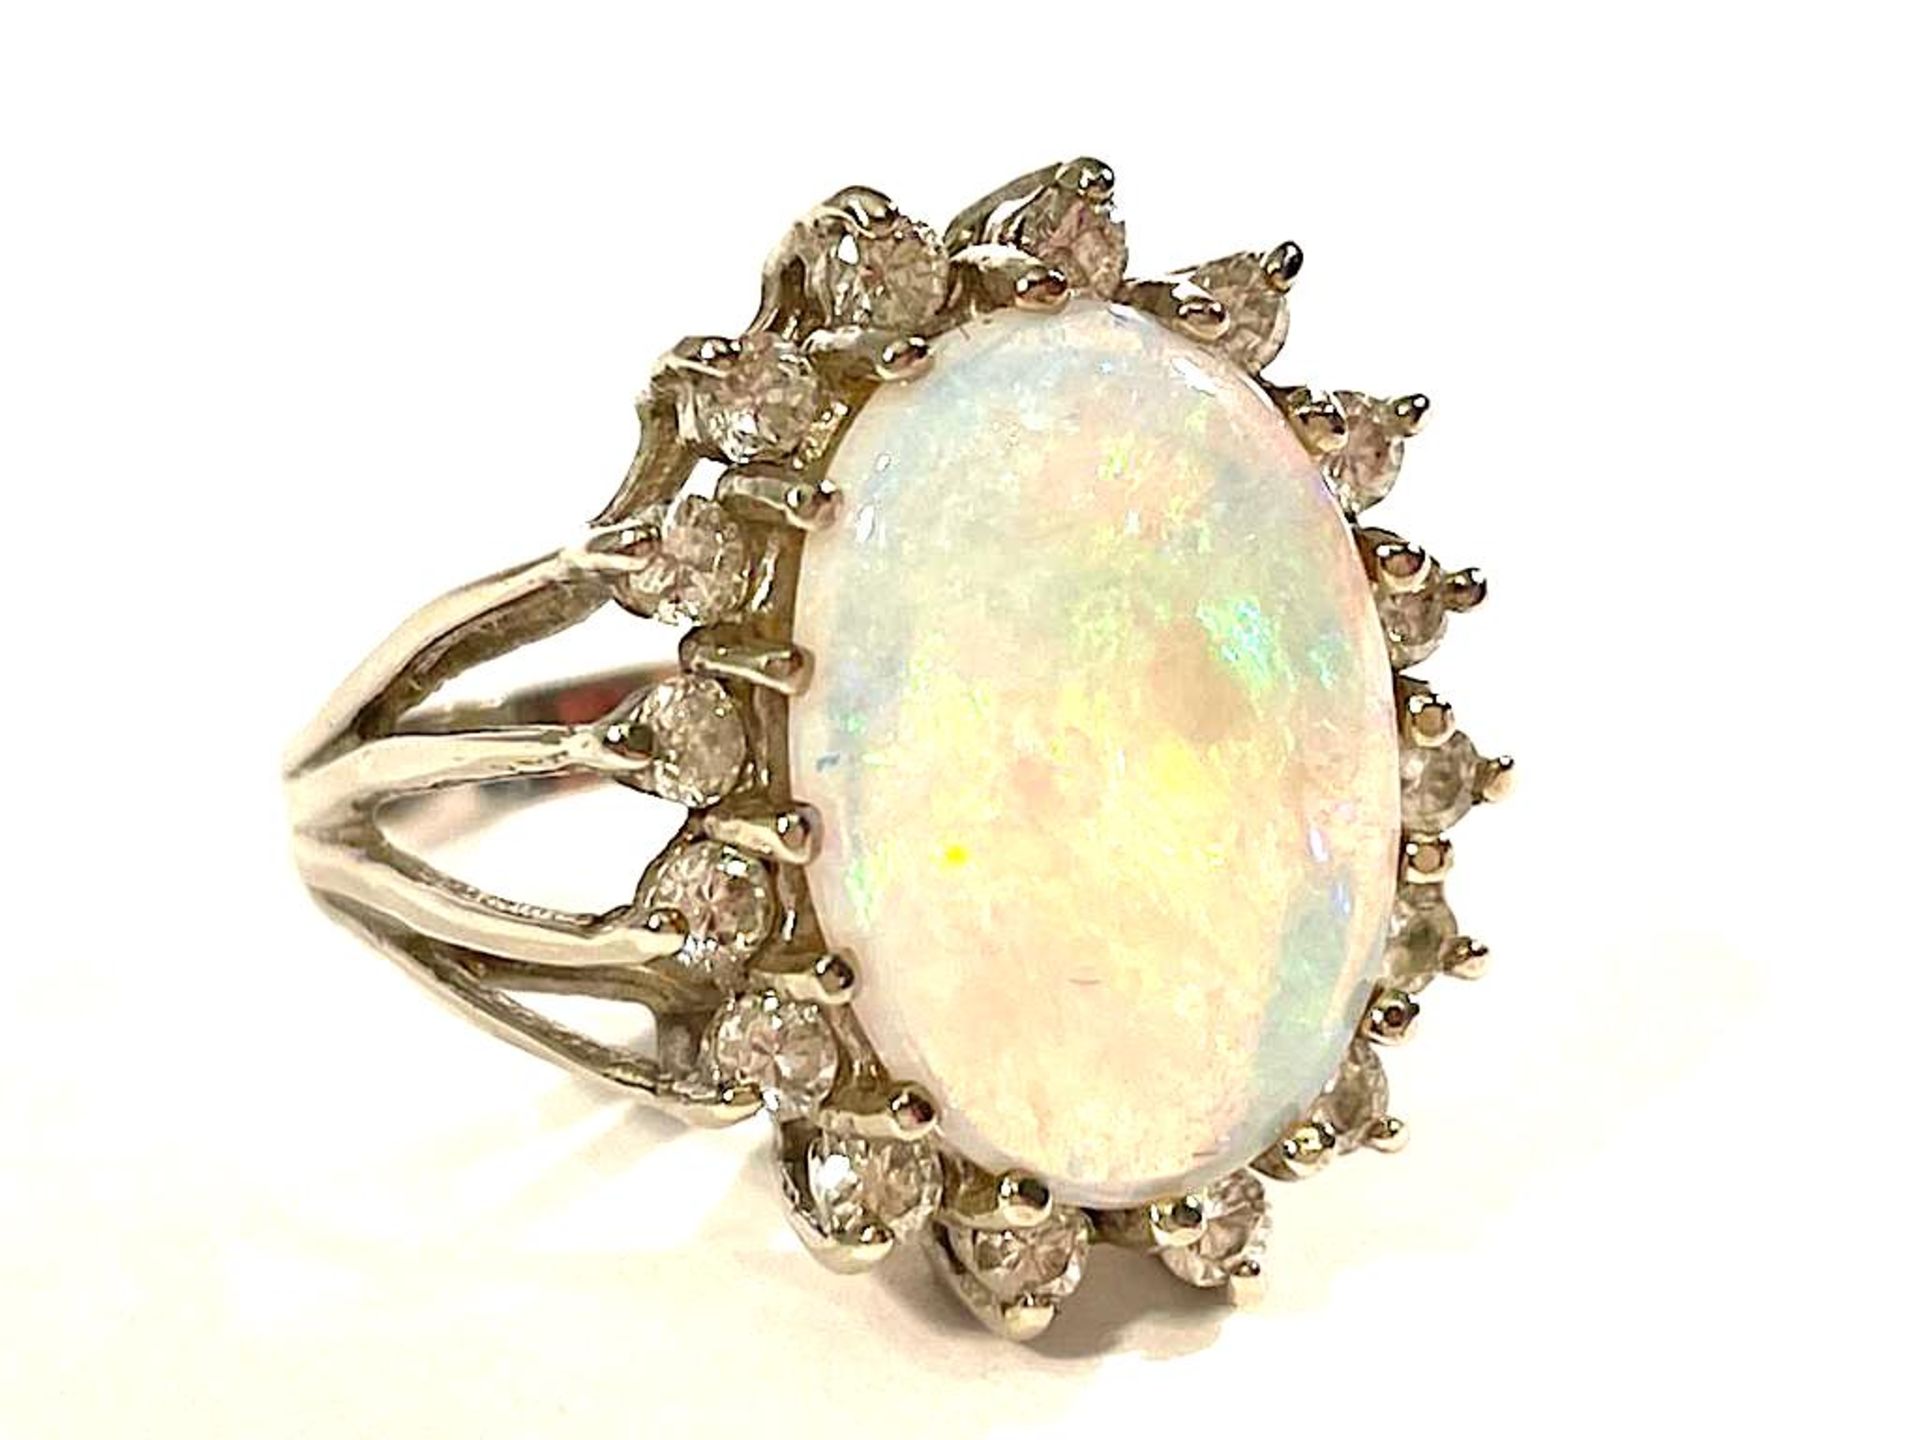 Opal ring - Image 12 of 12